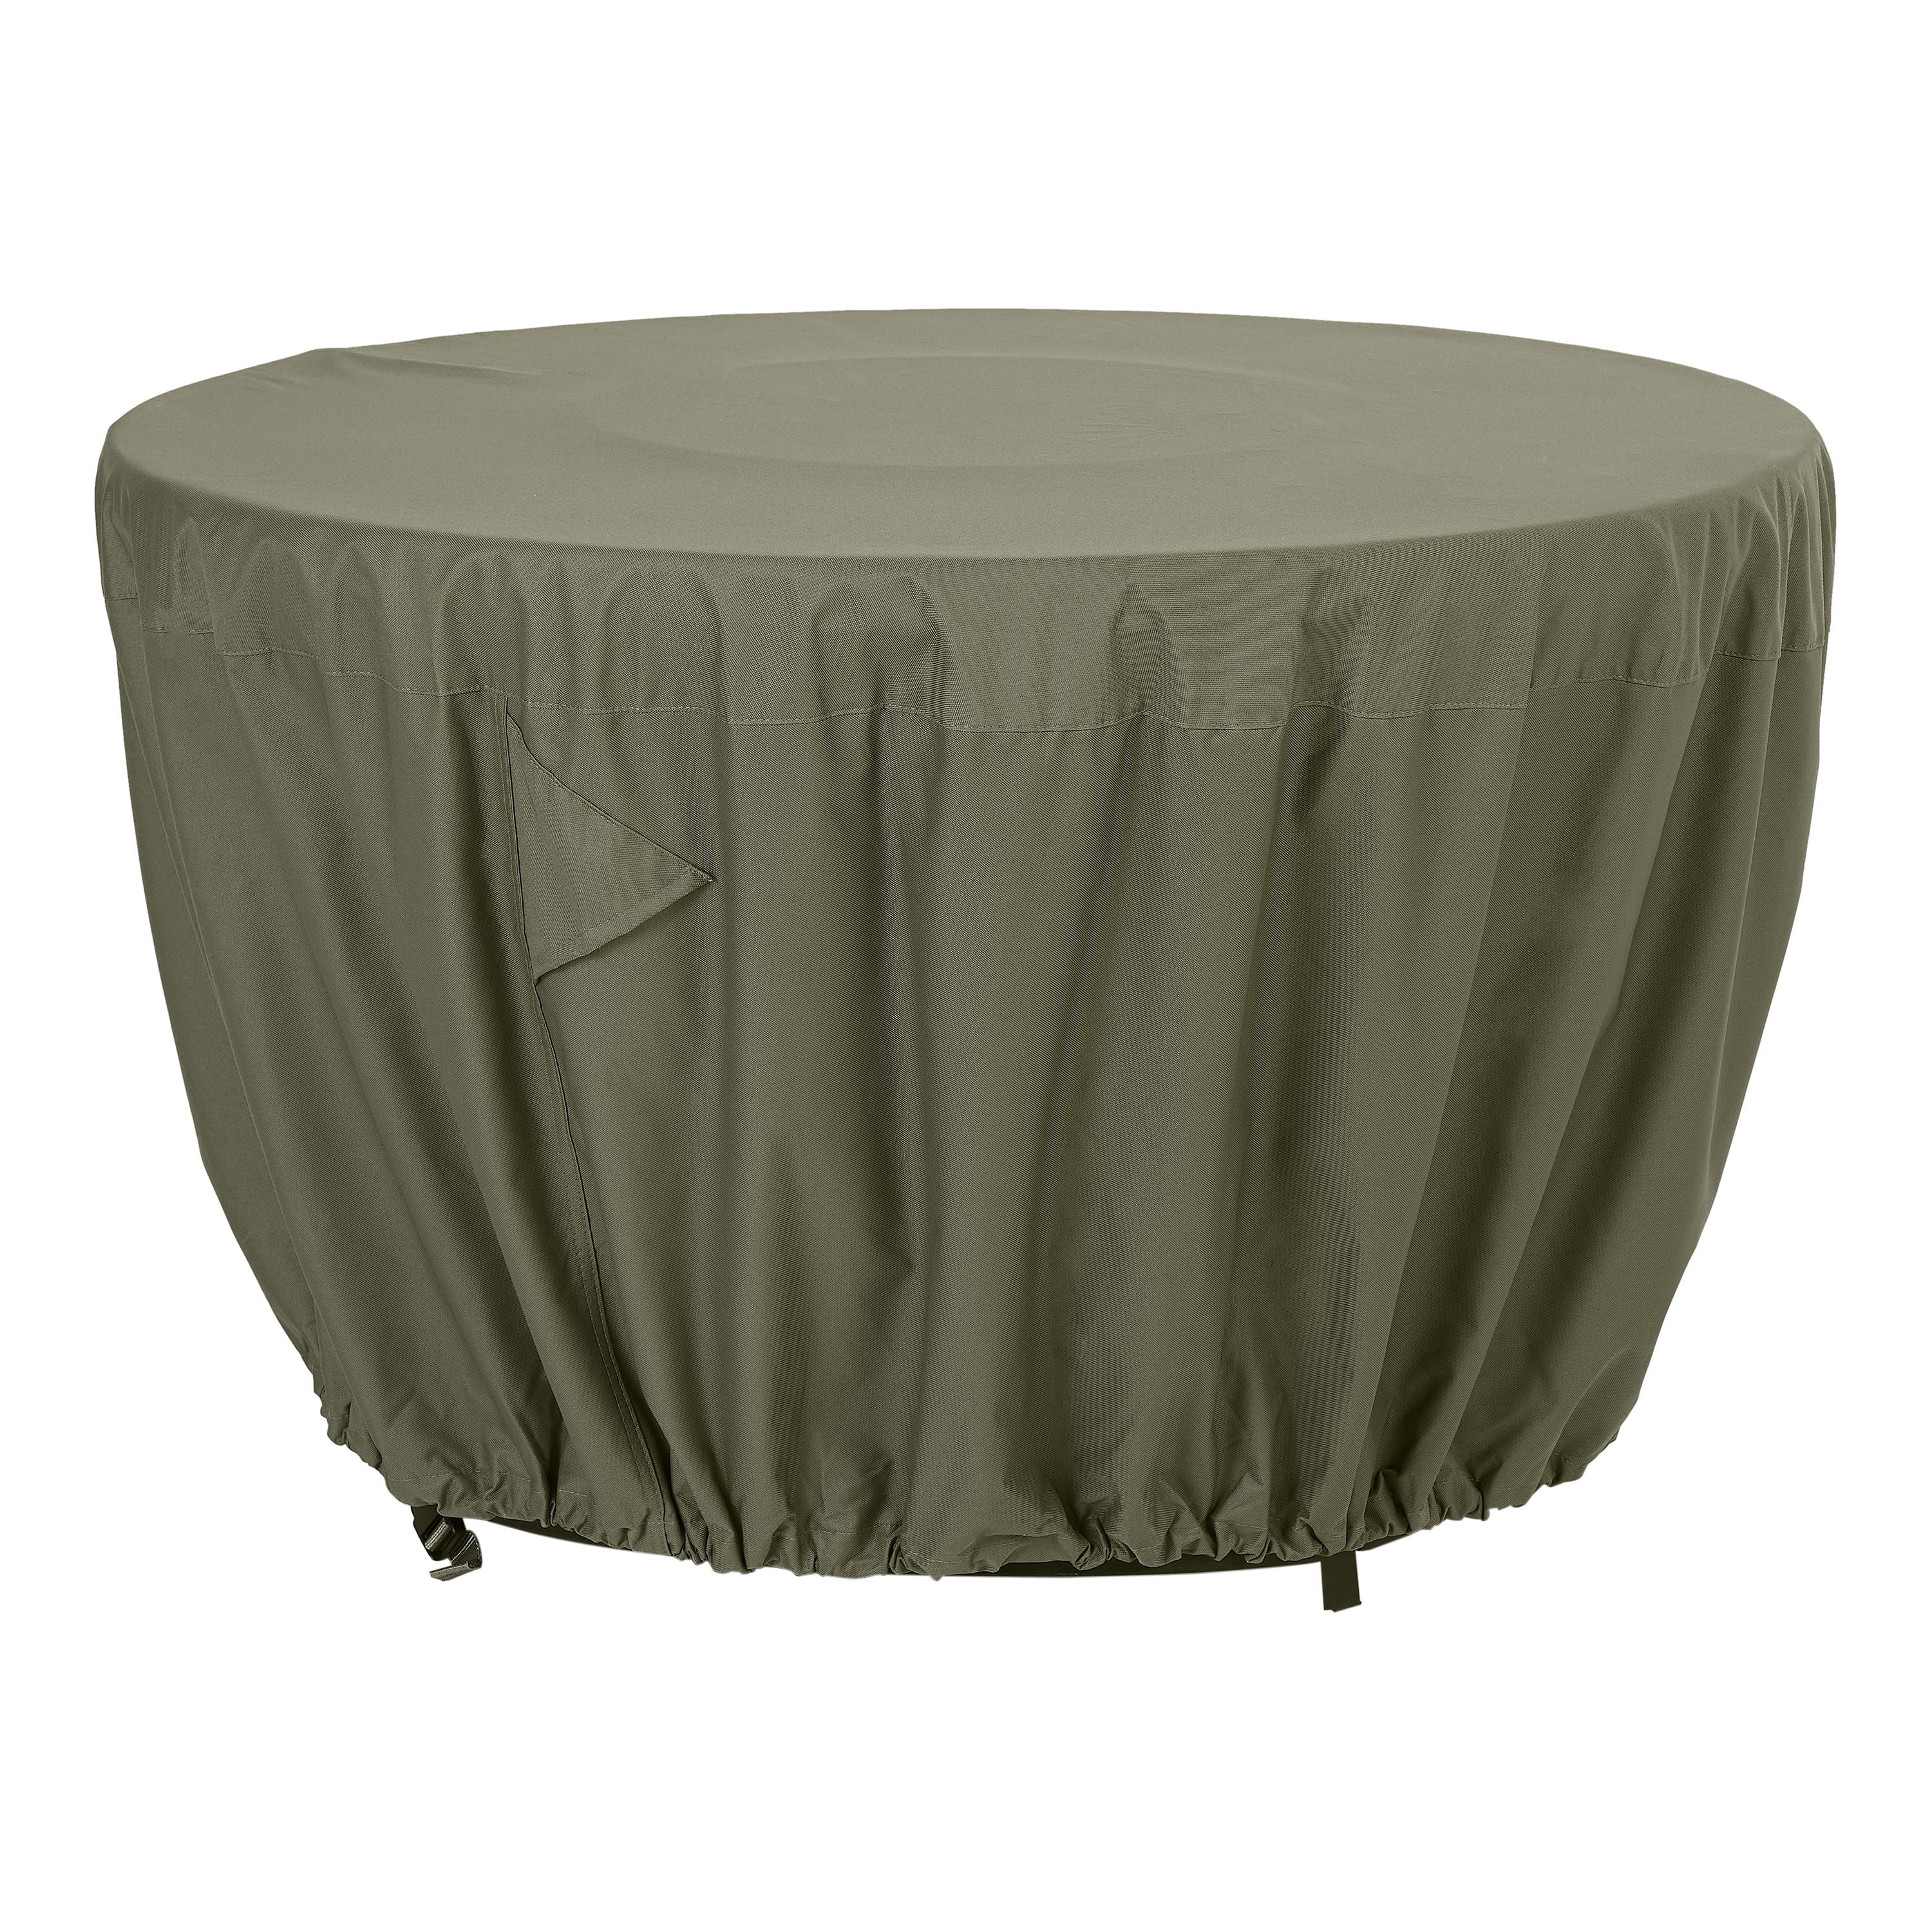 Patio Bench Cover In Beige, 50 Fire Pit Cover